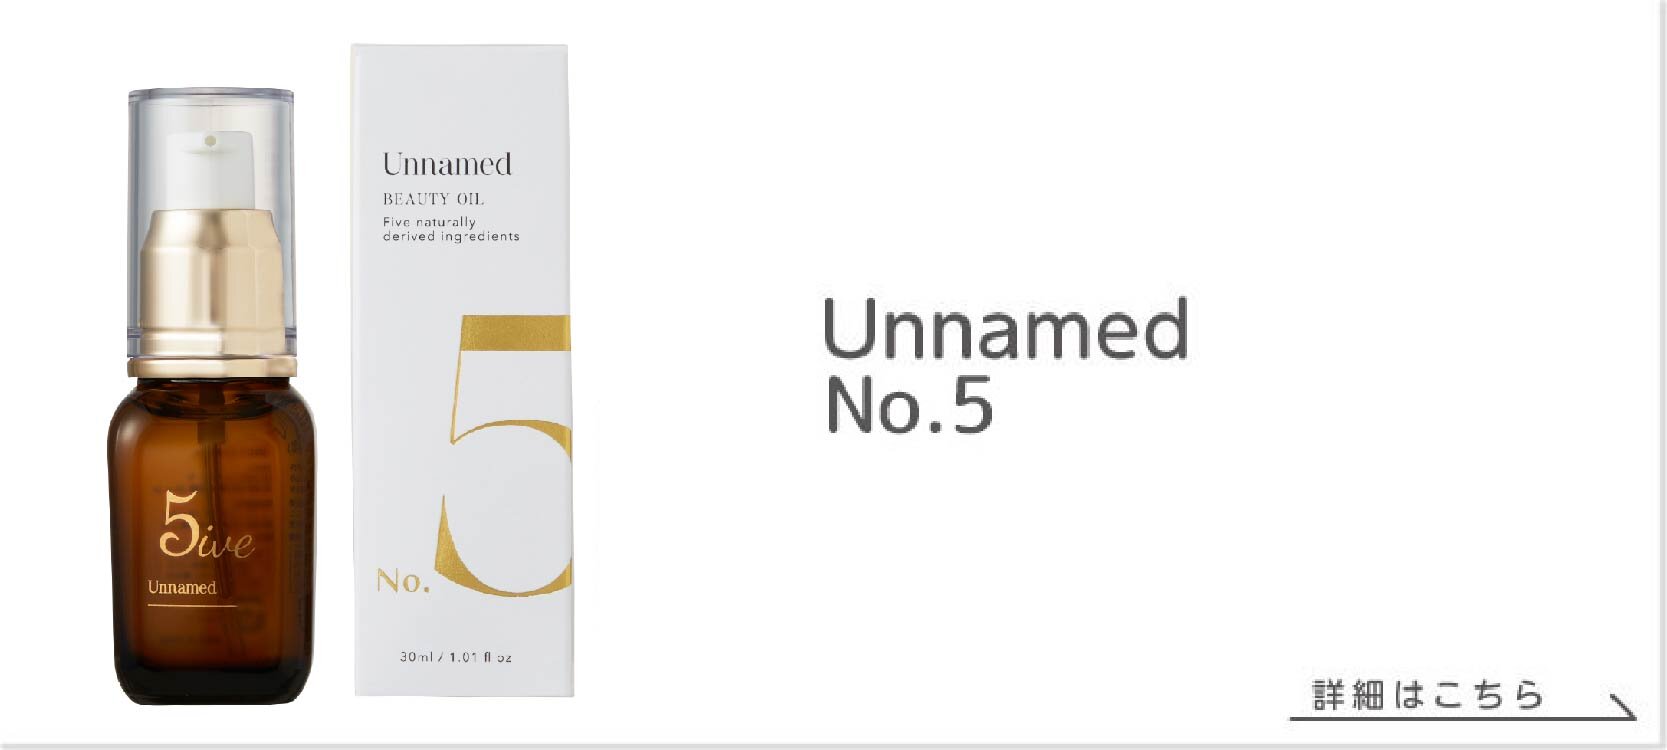 Unnamed N0.5